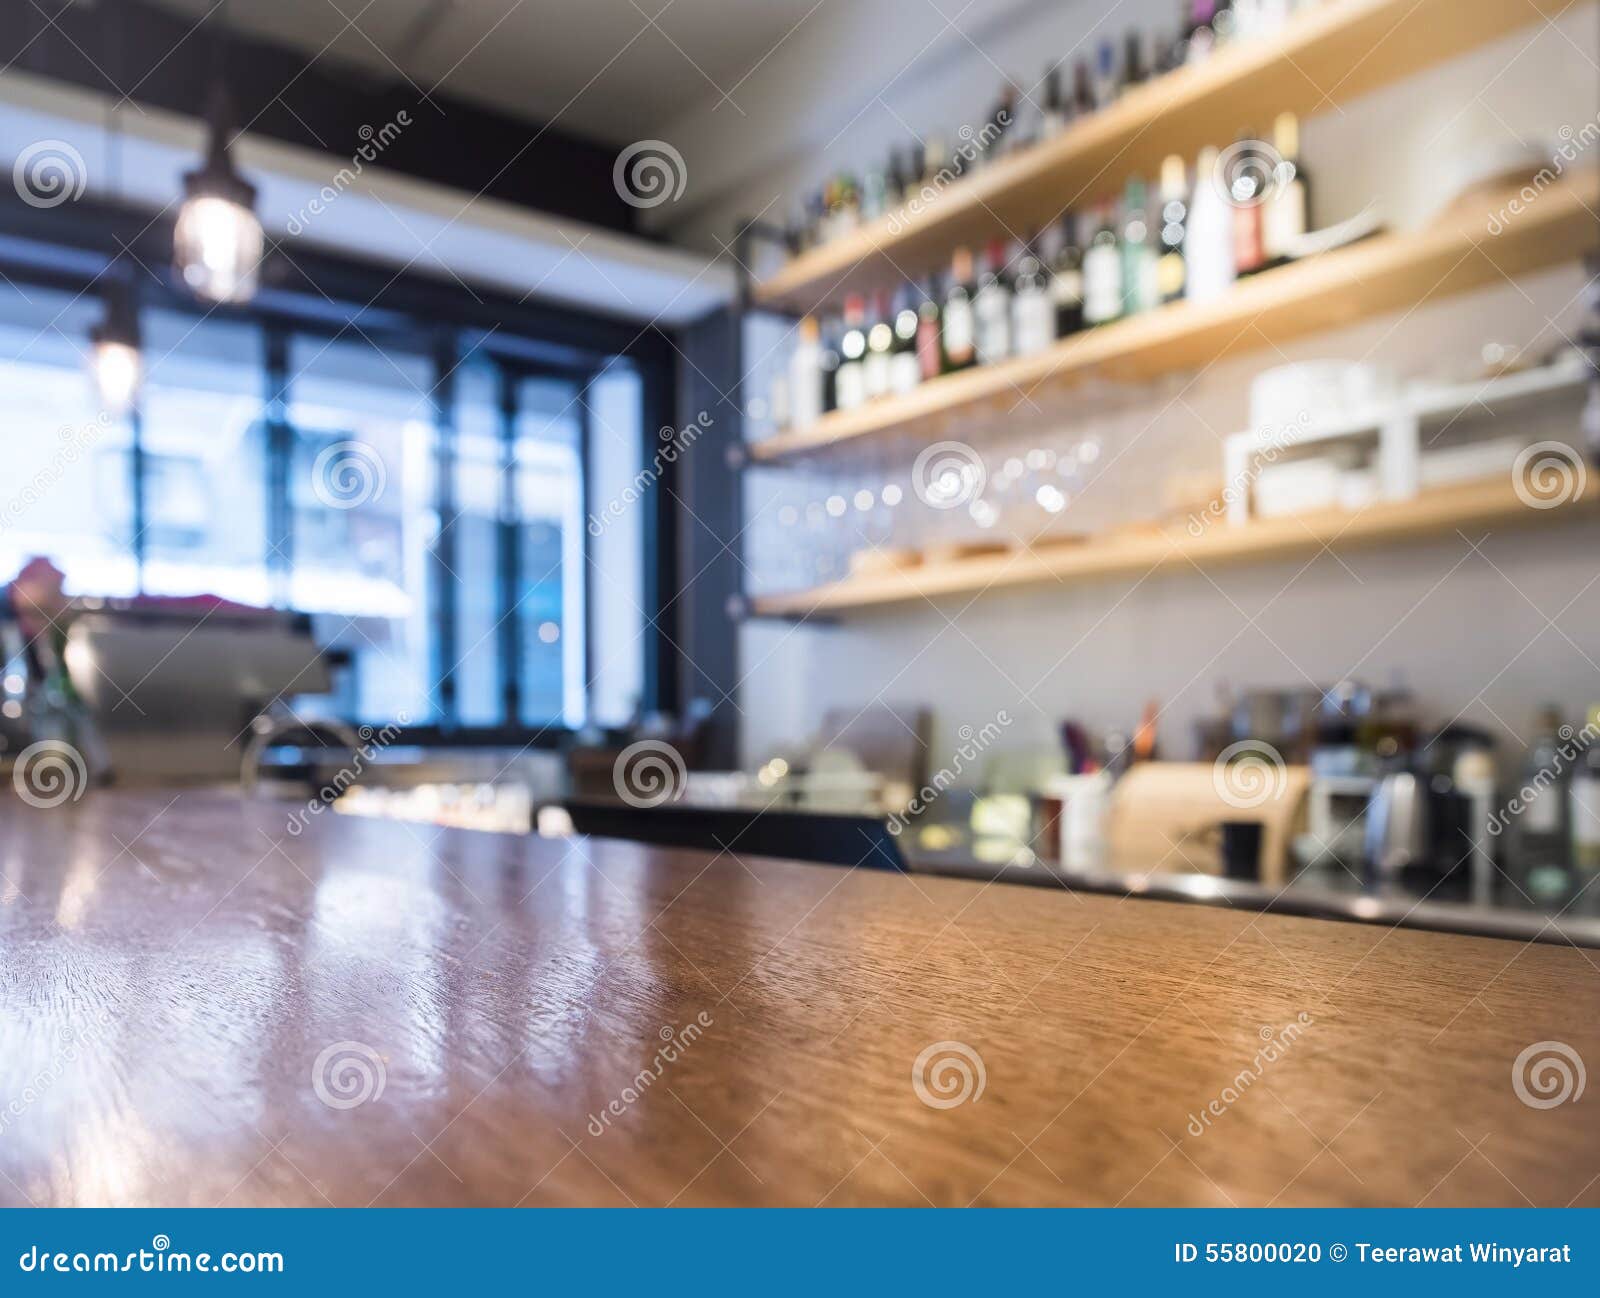 table top counter with kitchen shelf cafe bar background